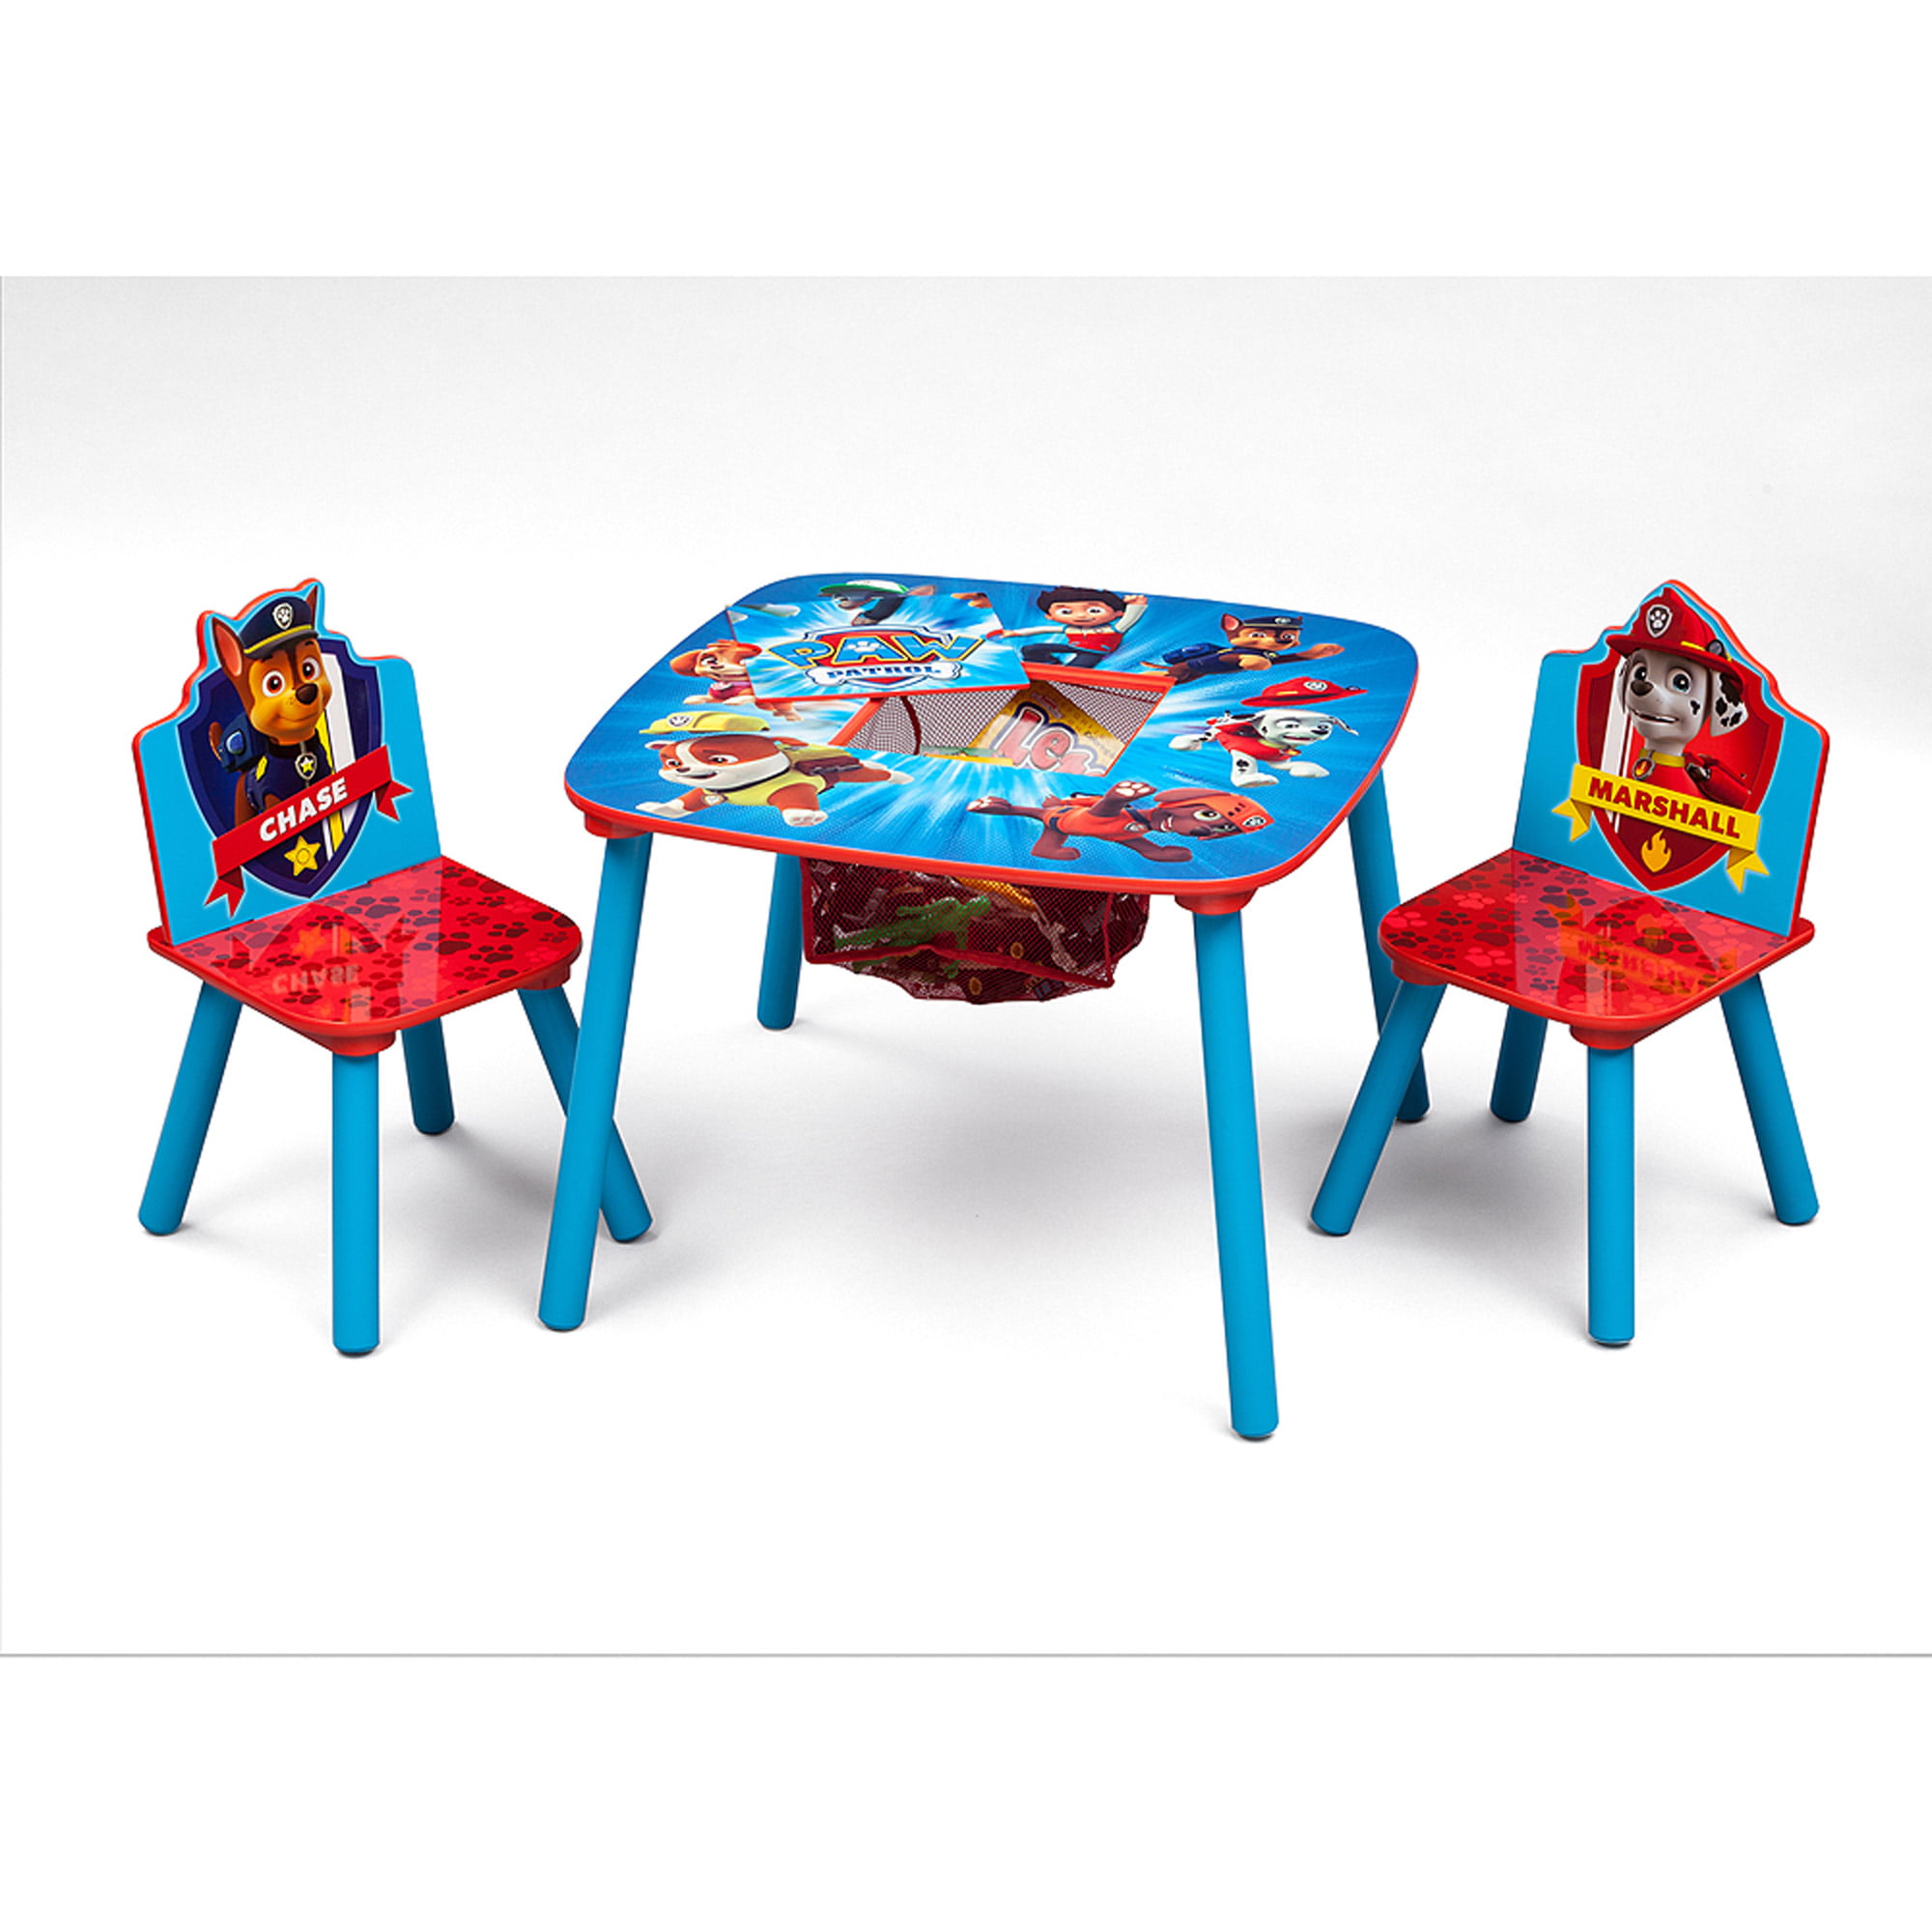 Childrens Kids Plastic Premium Table and Puppy Chair Set Includes 4 Chairs Blue 